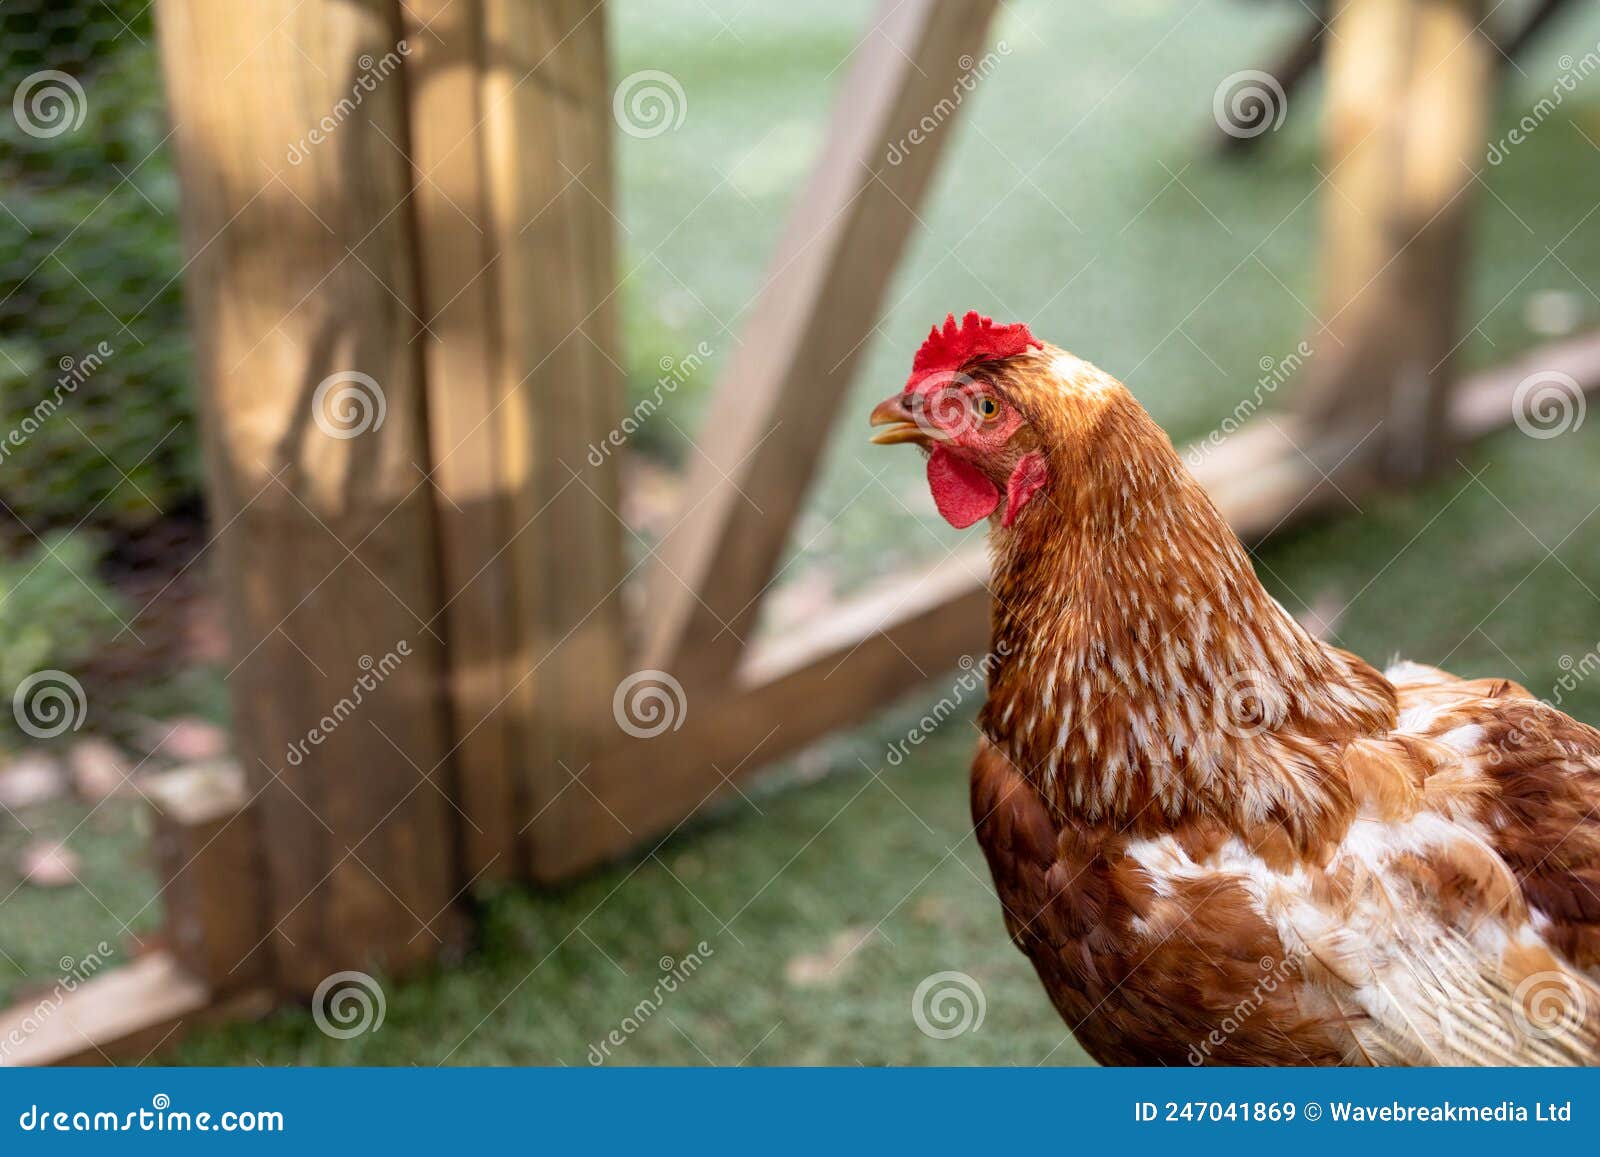 Close-up of Brown Hen with Red Crest in Cage at Poultry Farm Stock Image -  Image of unaltered, closeup: 247041869